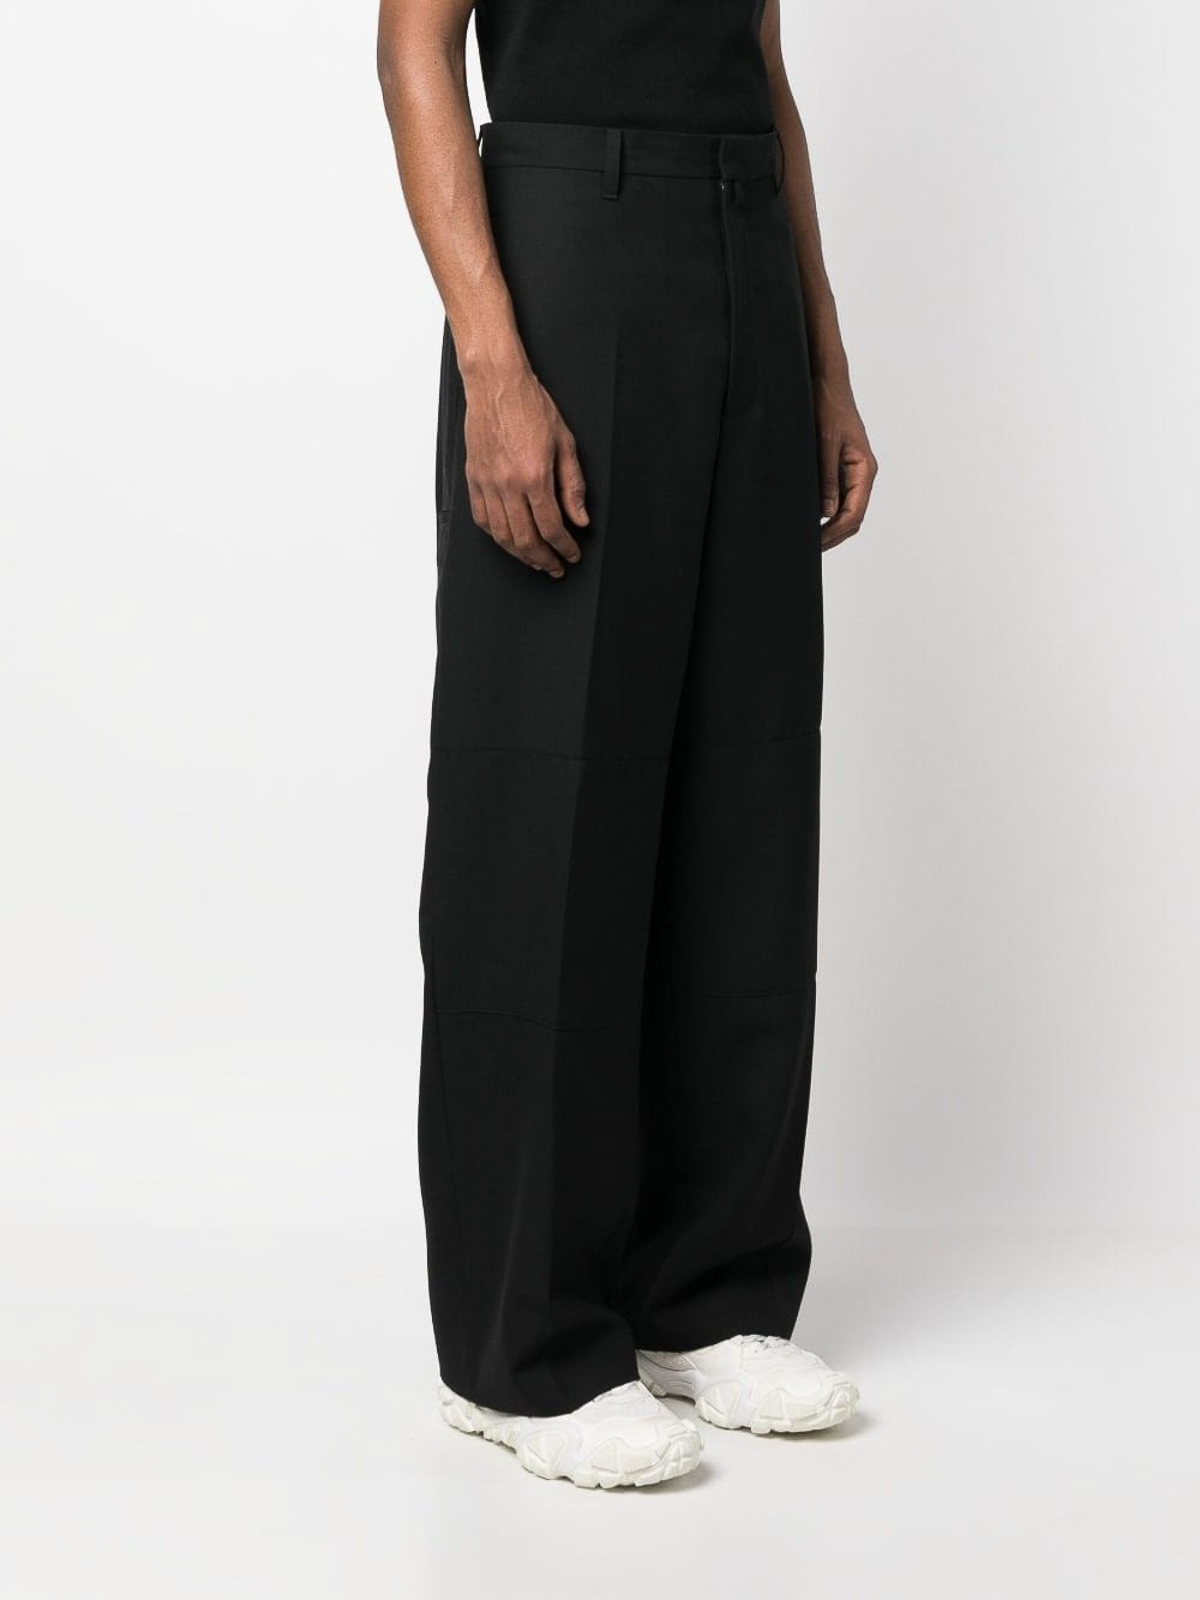 Women's Mocha Brown Belted Wide Leg Trousers | Jessica | 4th & Reckless